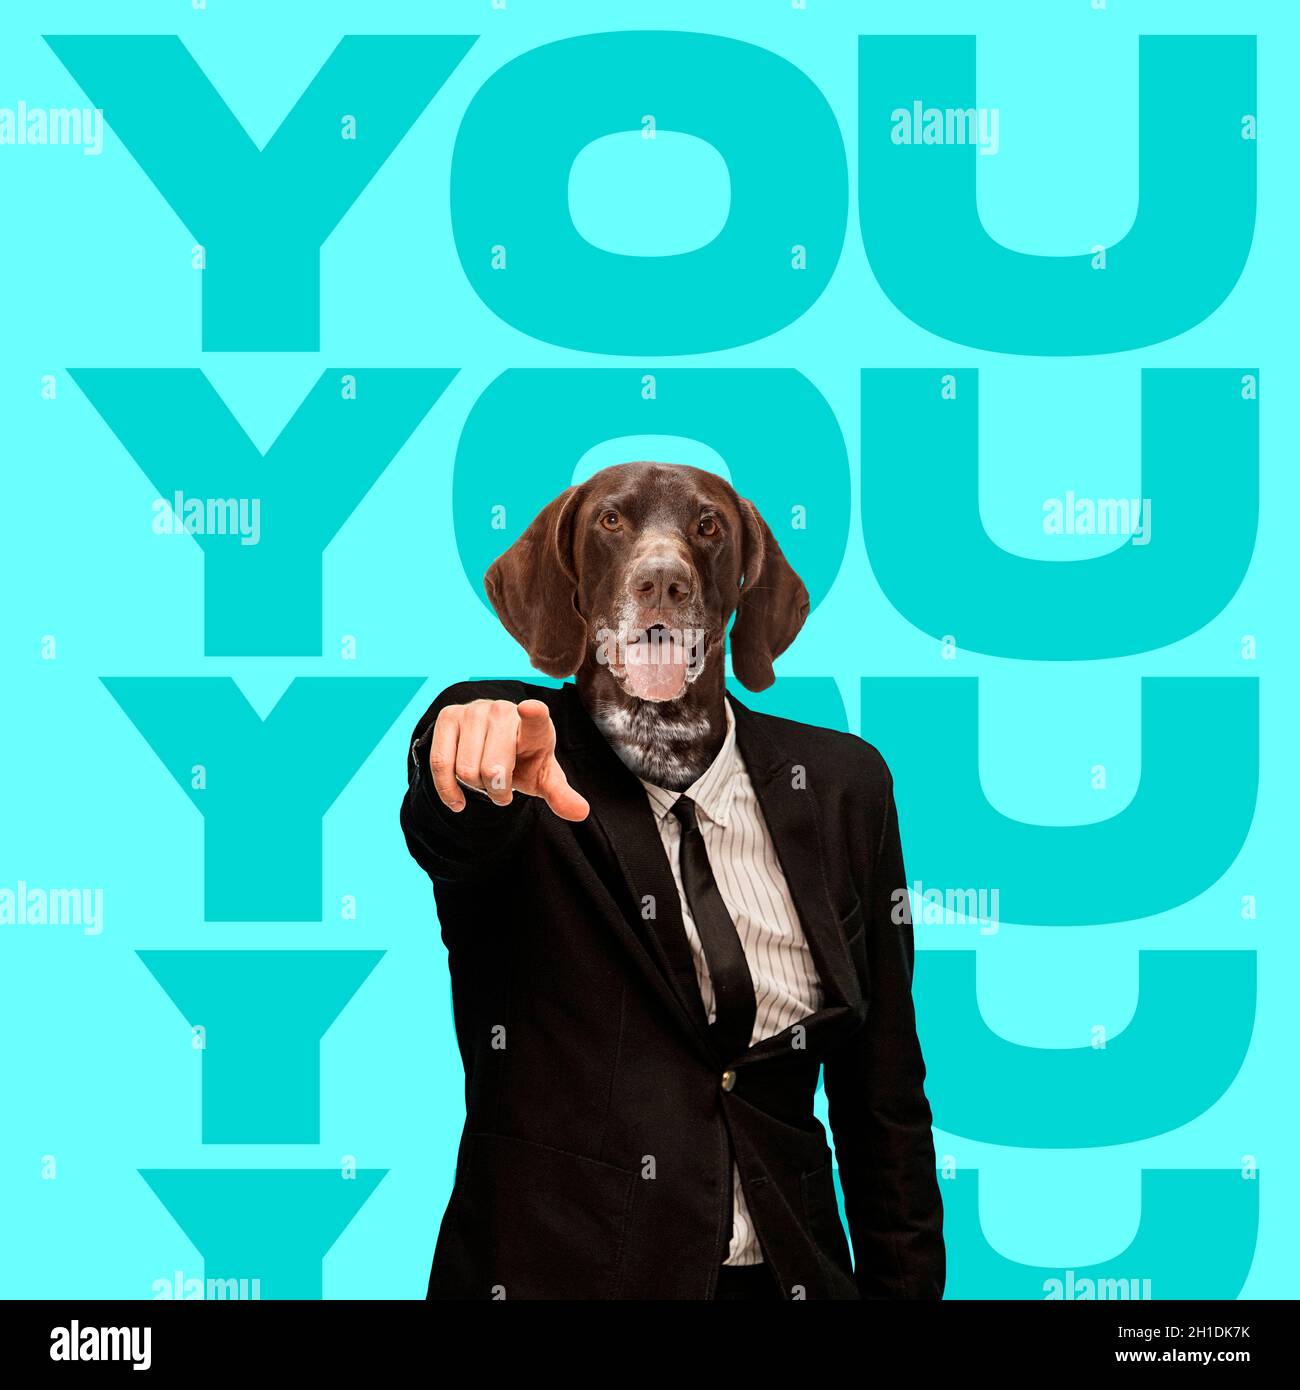 https://c8.alamy.com/comp/2H1DK7K/contemporary-art-collage-of-man-in-black-official-suit-with-dog-head-isolated-over-mint-background-with-lettering-2H1DK7K.jpg